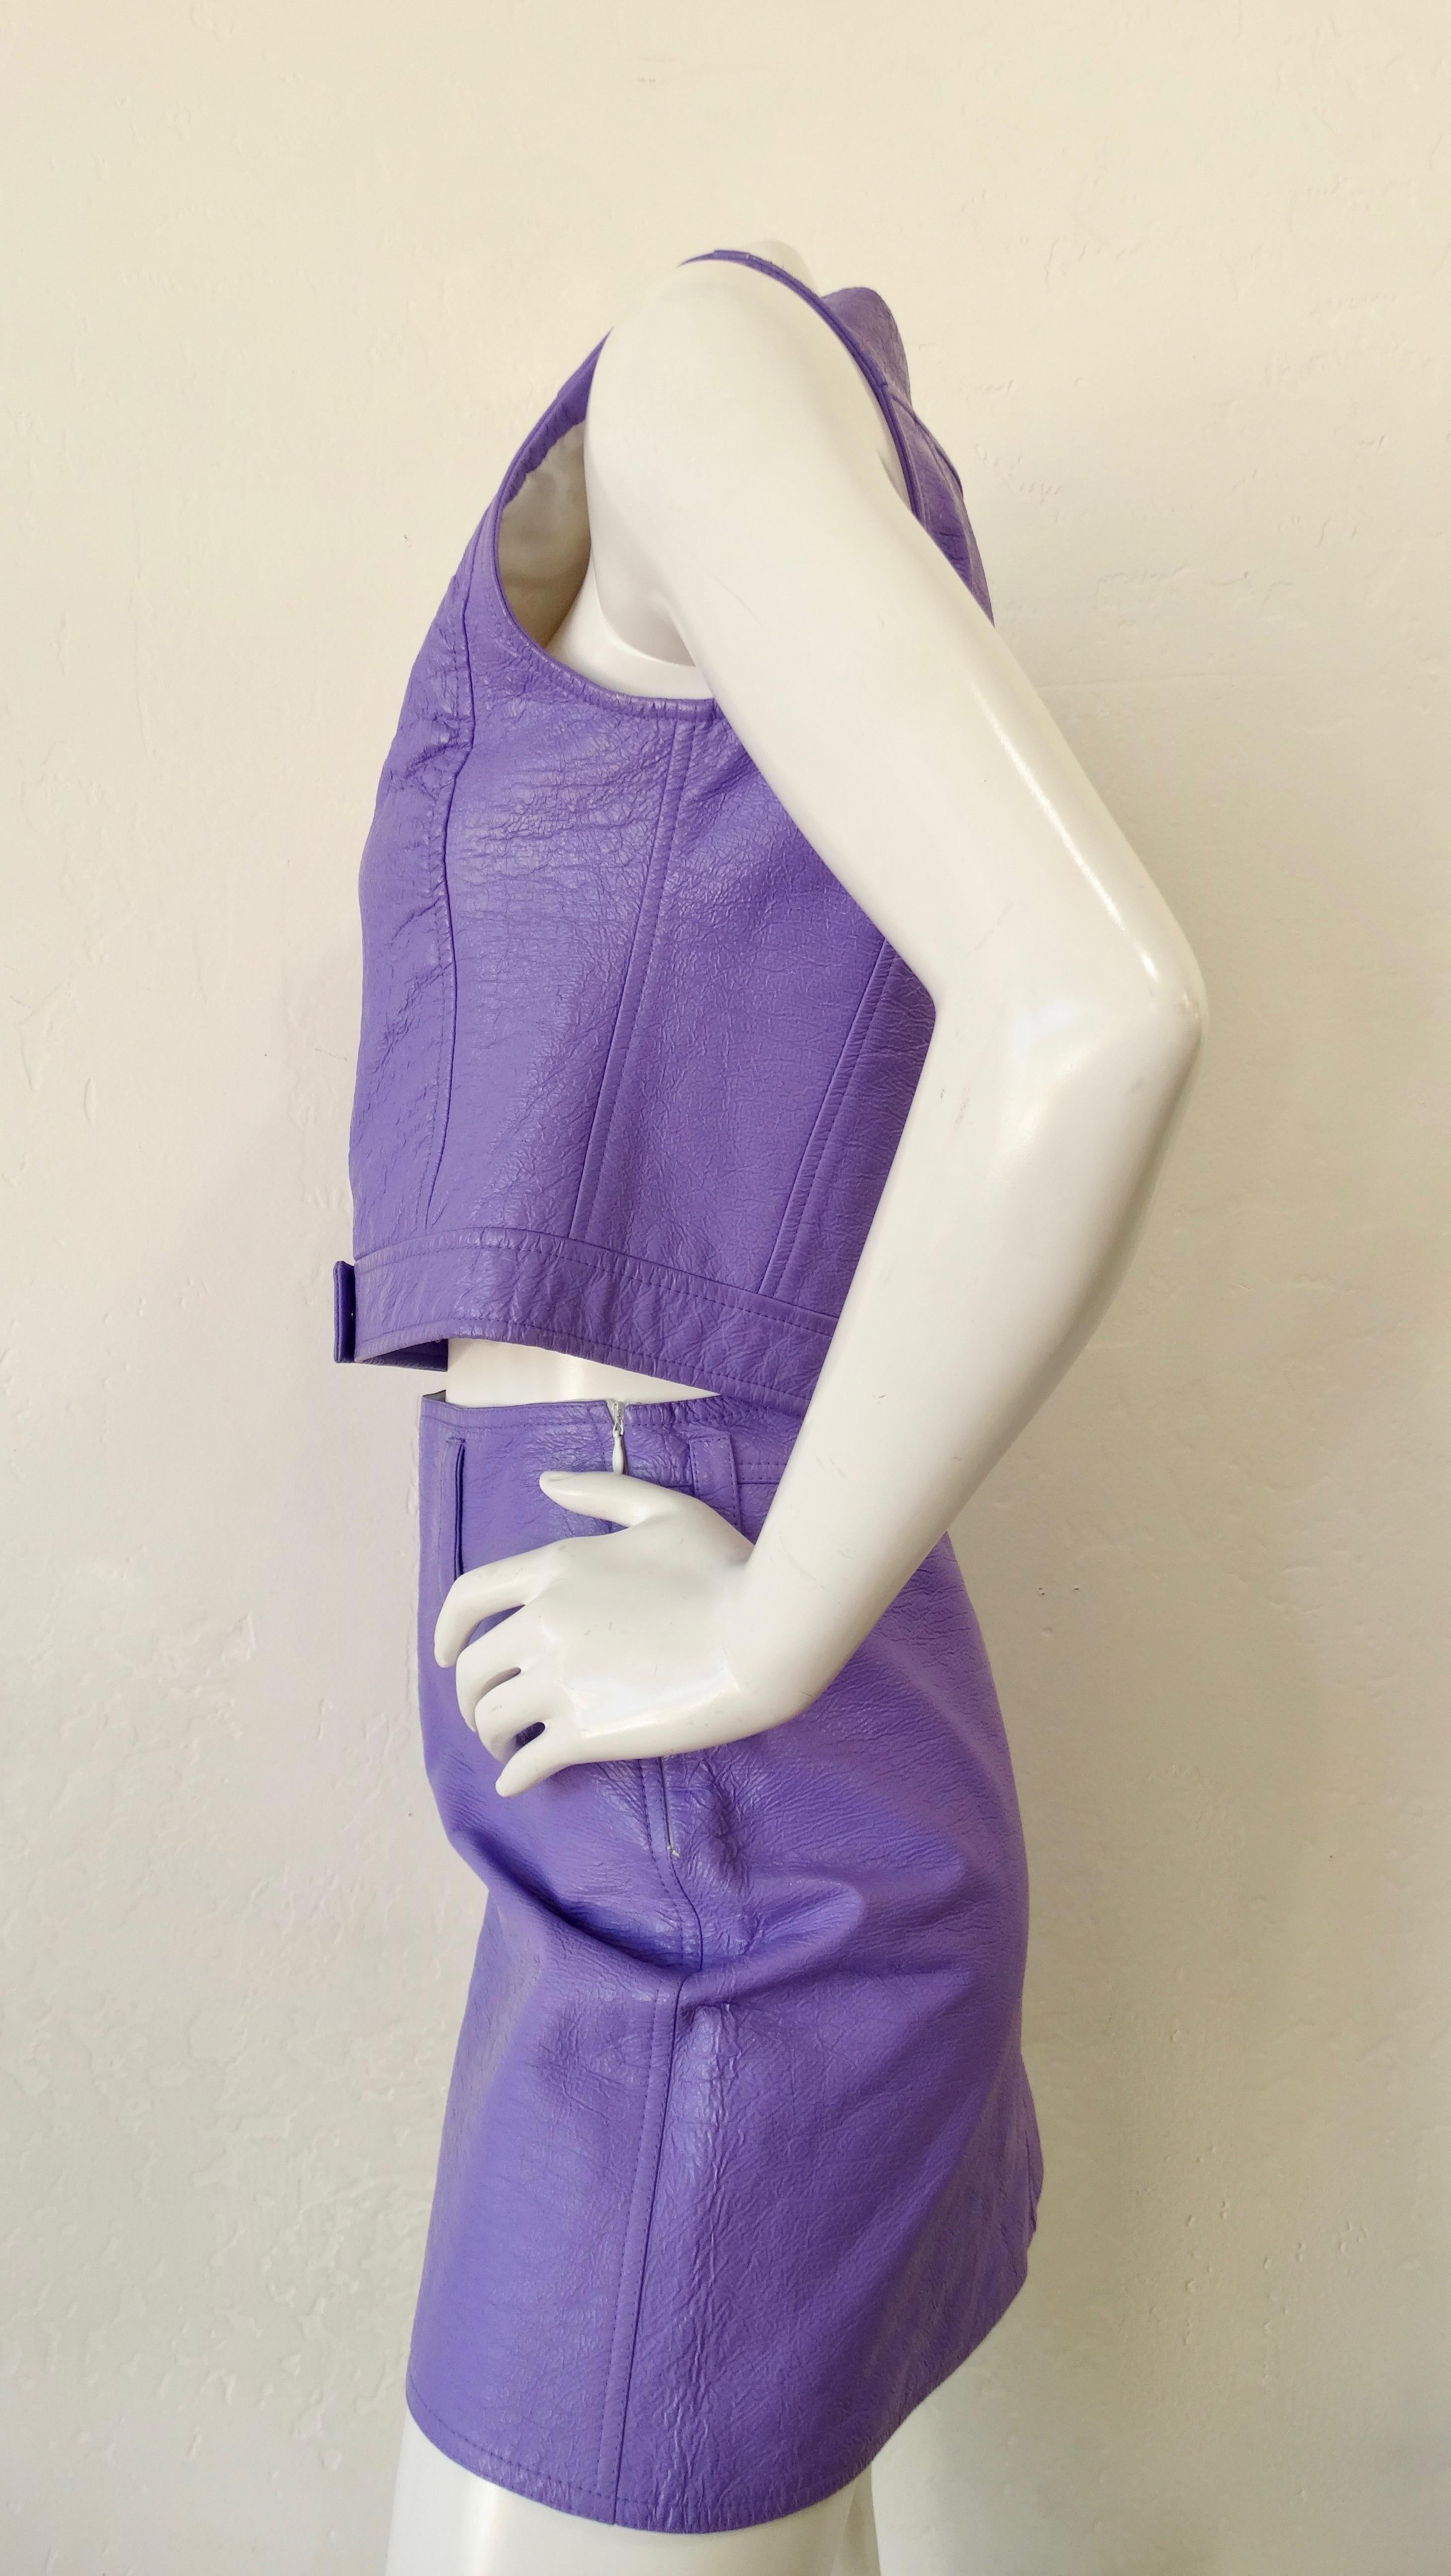 Snag yourself a piece from Courréges' space age era with this outfit! Circa late 1960s/ early 1970s, this outfit features a purple skirt and vest with a textured finish. Vest includes a notched collar, white snap buttons and the Courréges logo.